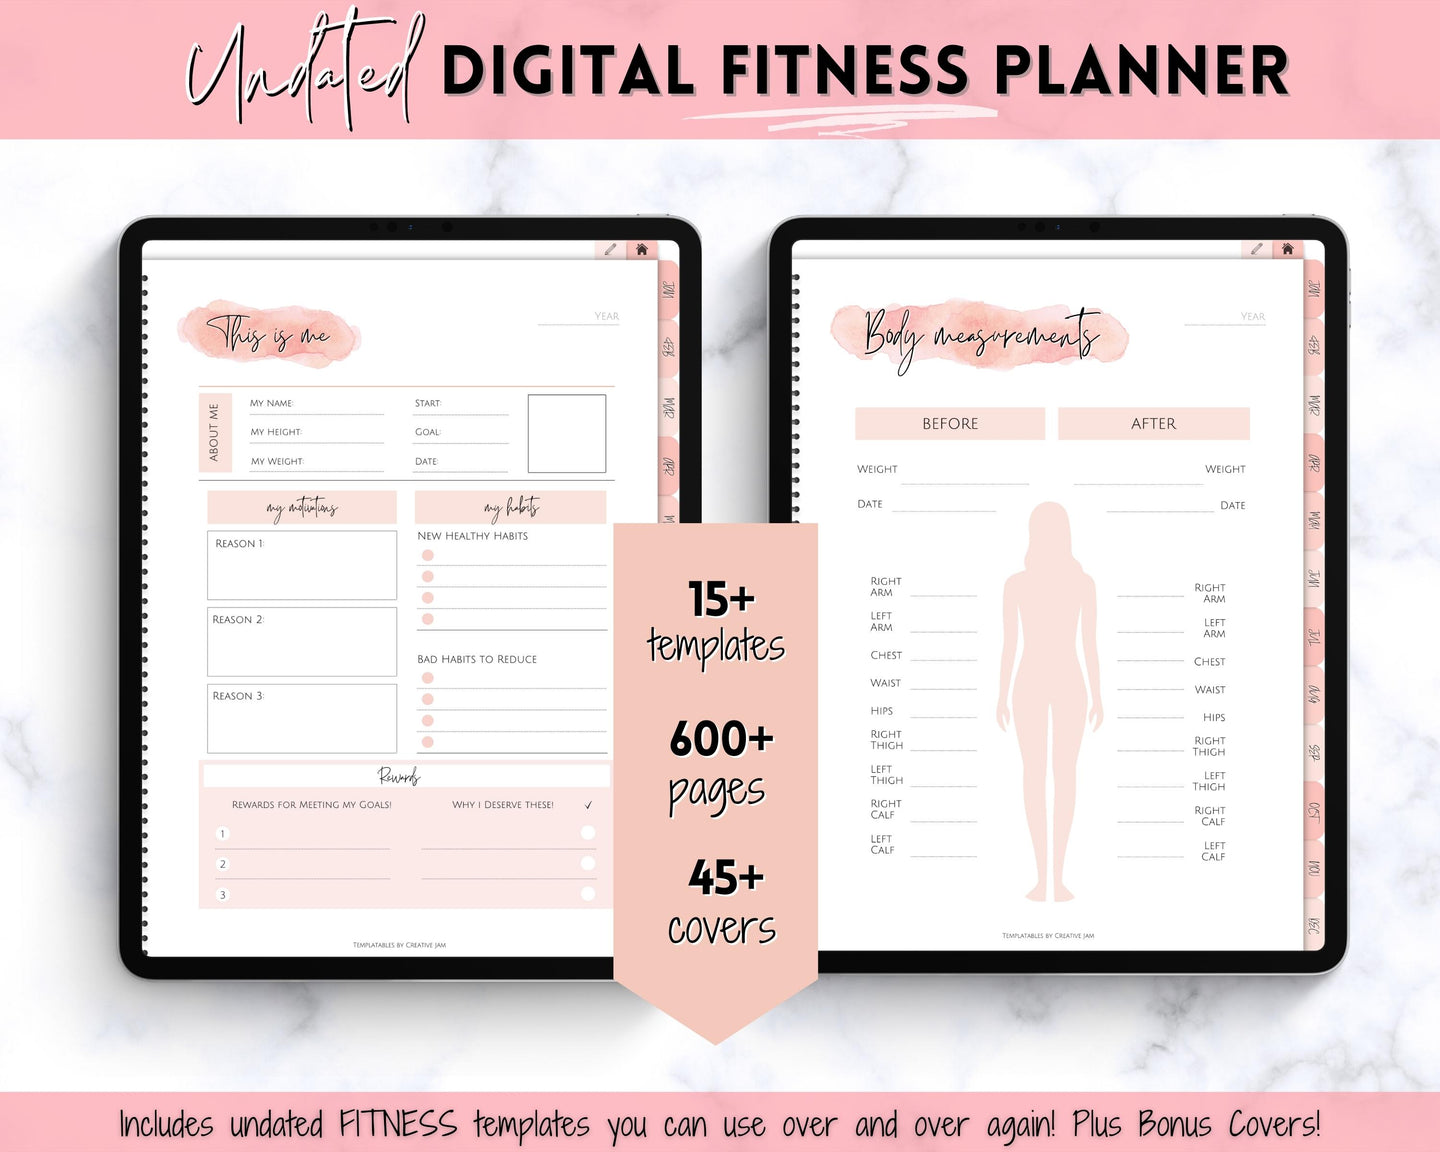 UNDATED Digital Fitness planner | iPad GoodNotes Fitness Journal, Weight Loss Tracker, & Workout Planner | Pink Watercolor